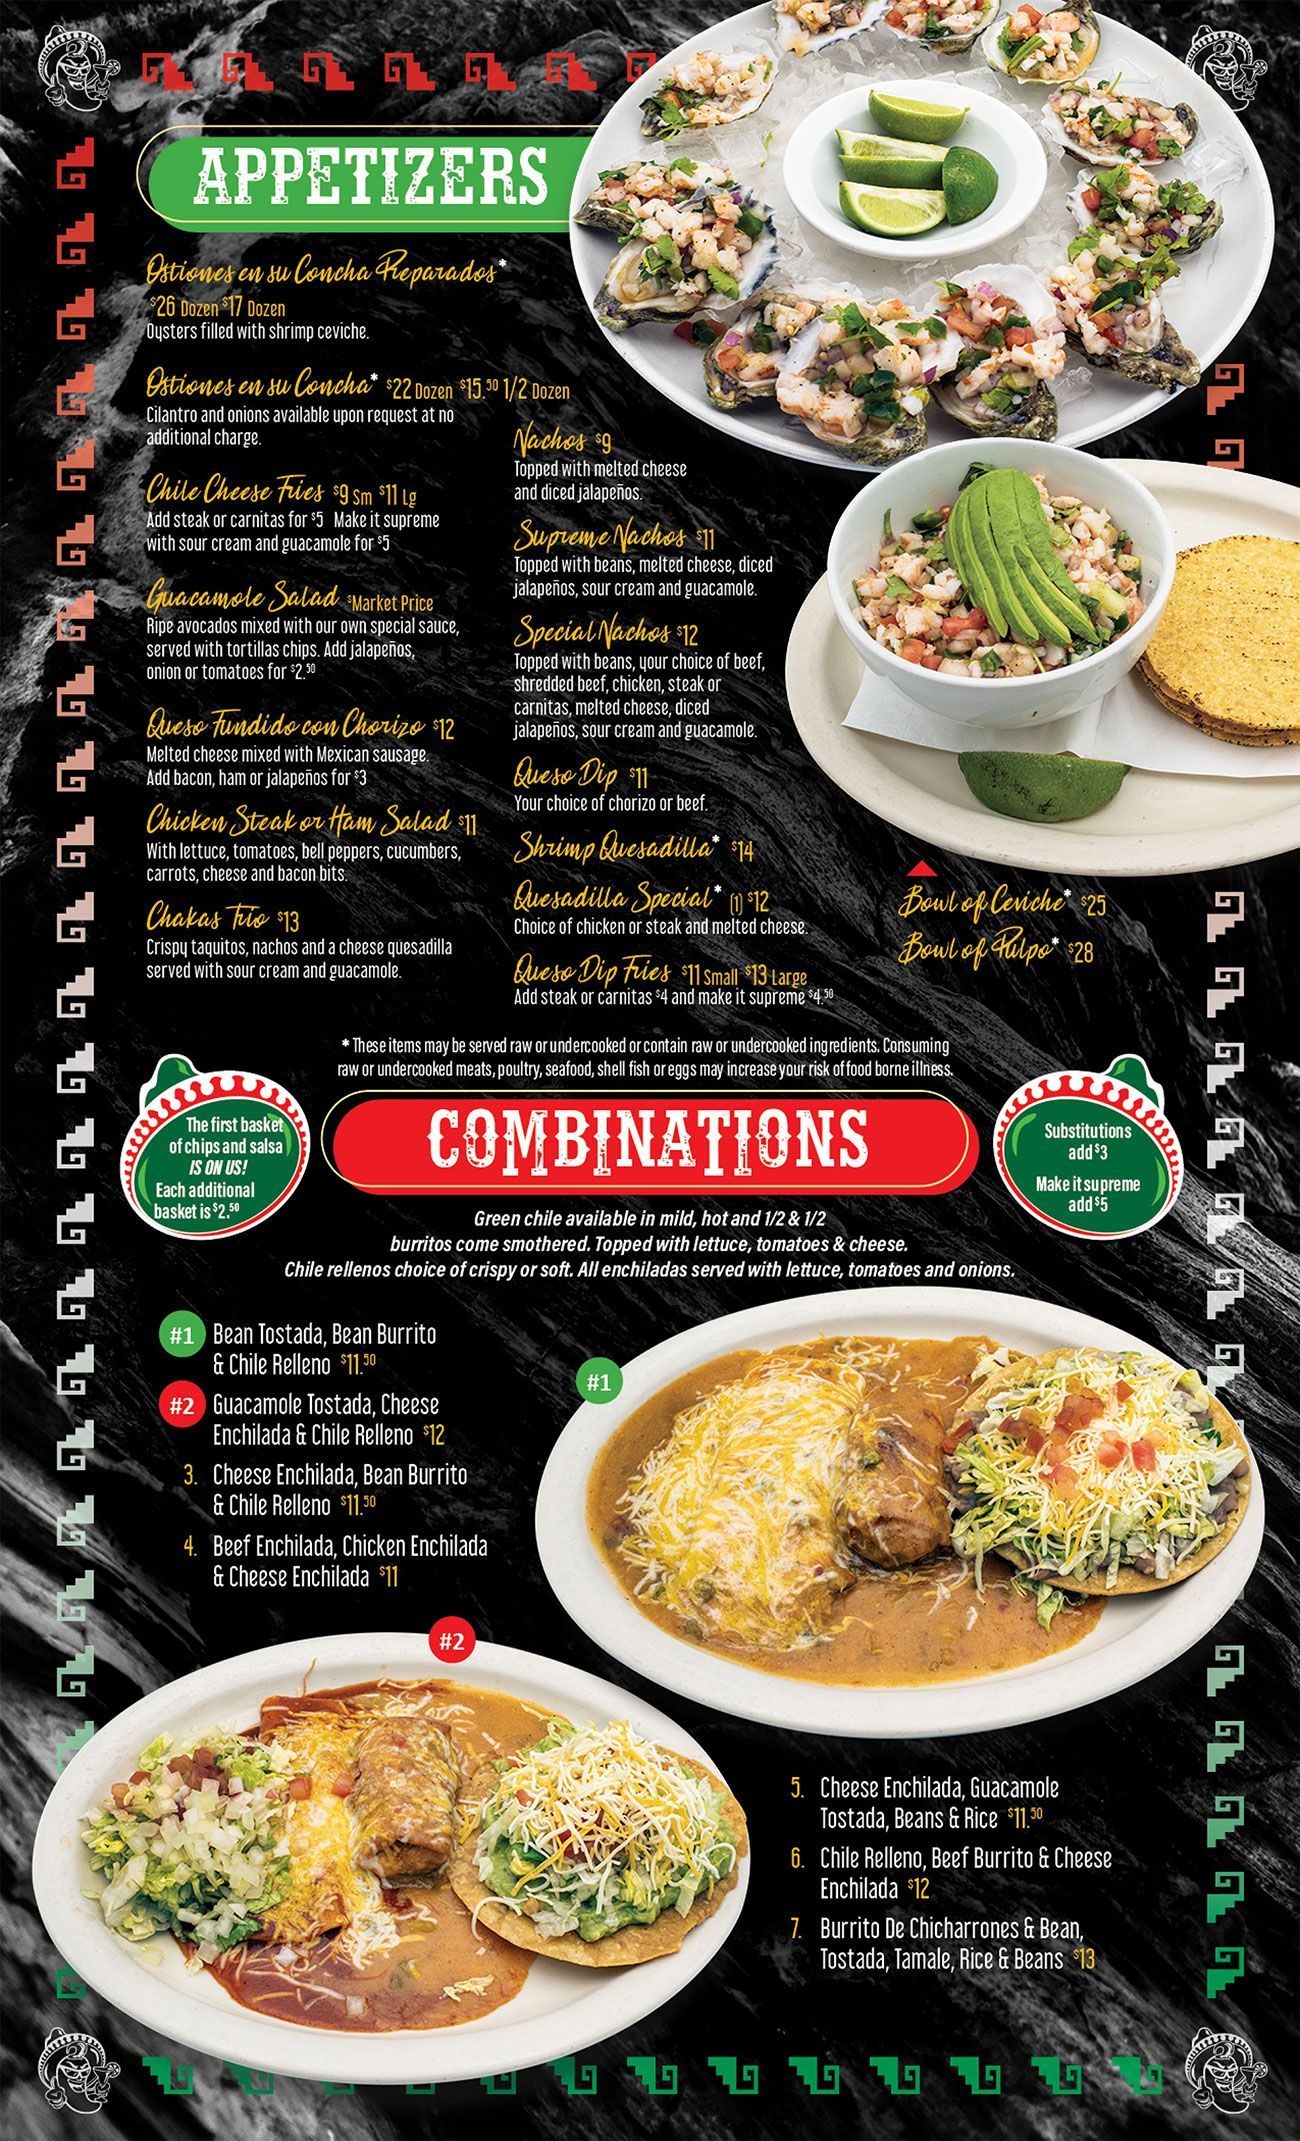 Chakas Mexican Restaurant - Appetizers and Combination menus